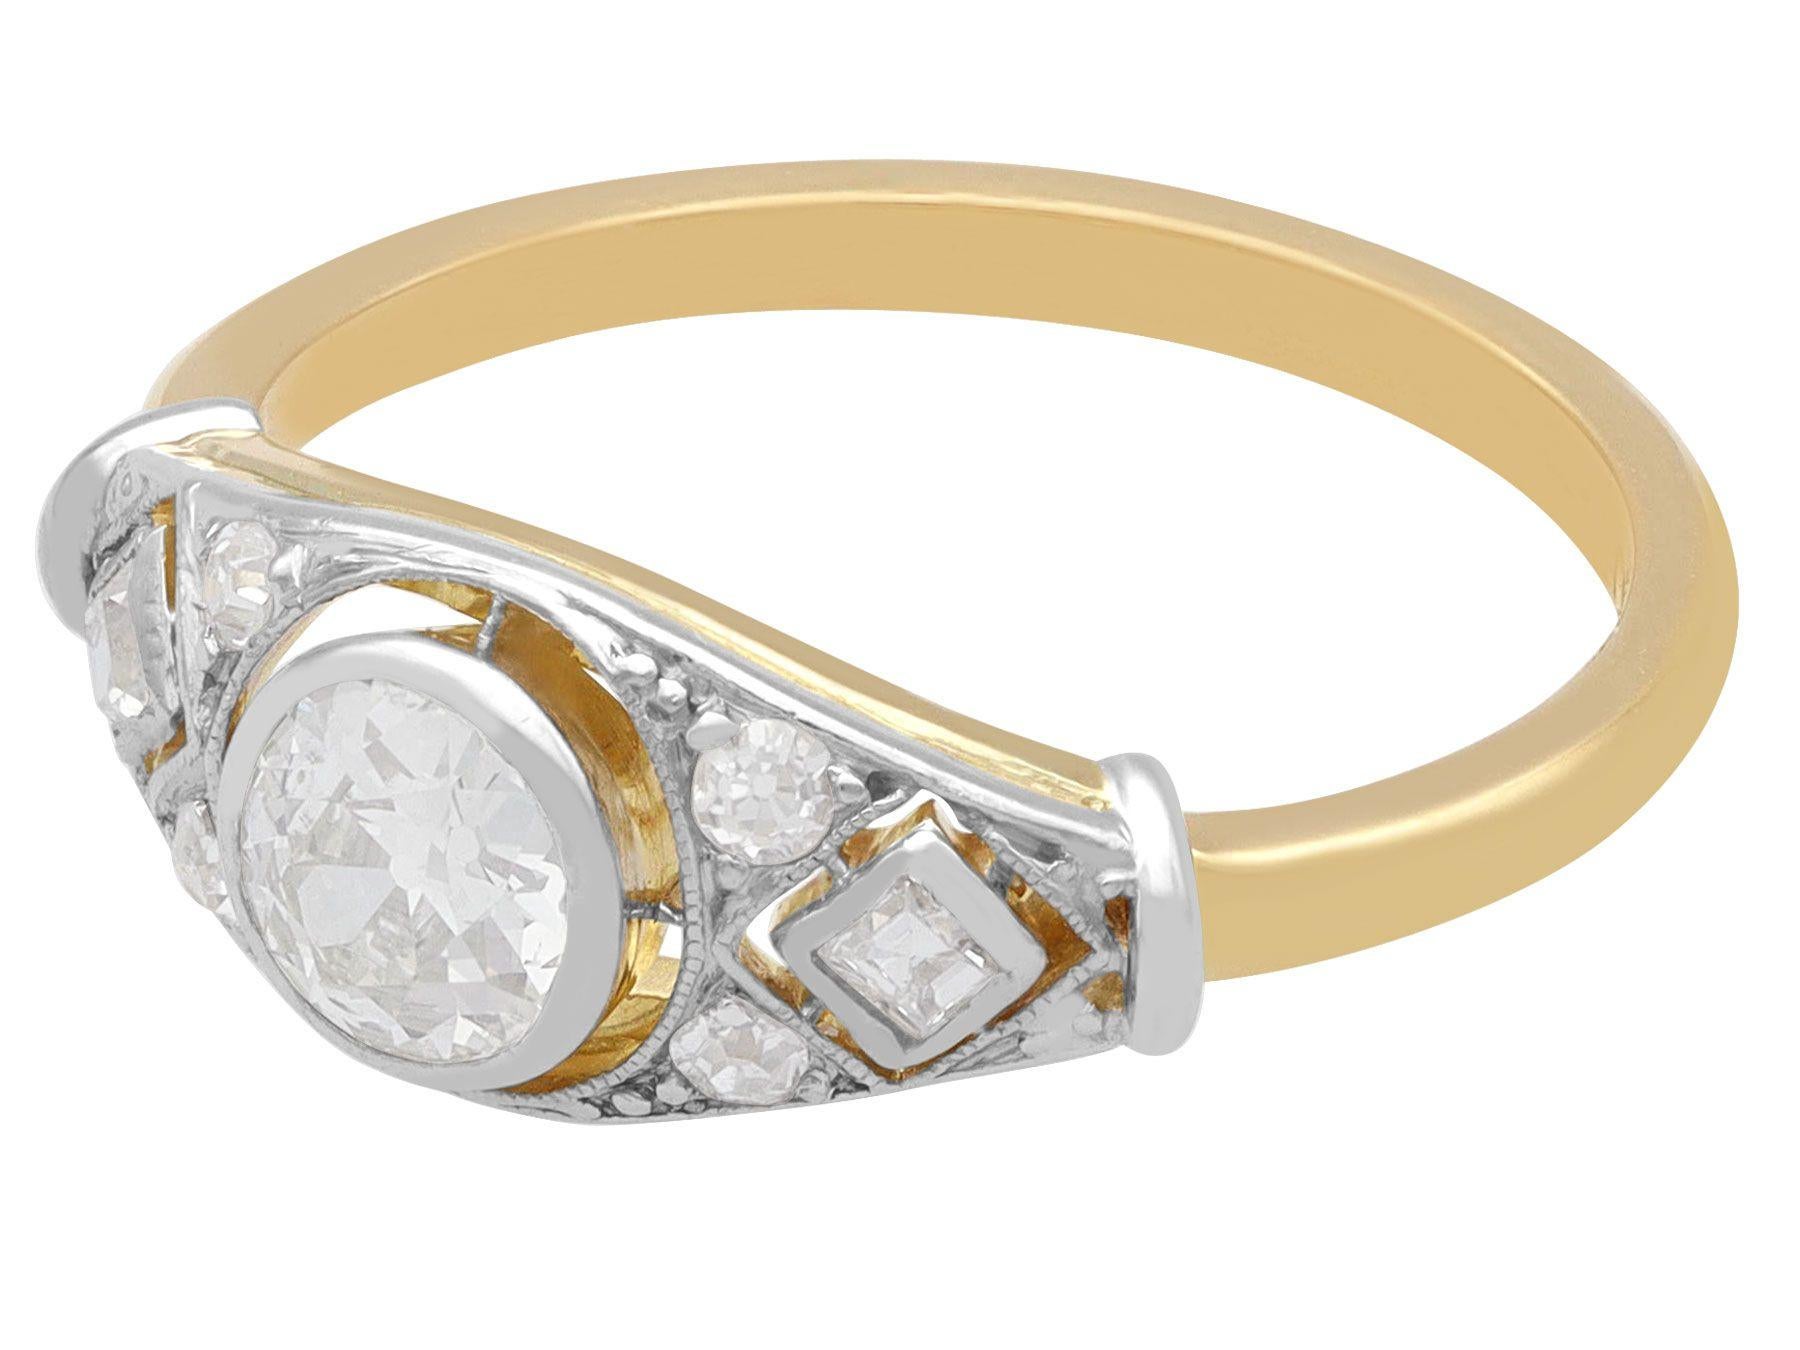 Round Cut Antique 0.83 Carat Diamond and 18k Yellow Gold Solitaire Ring, Circa 1920s For Sale